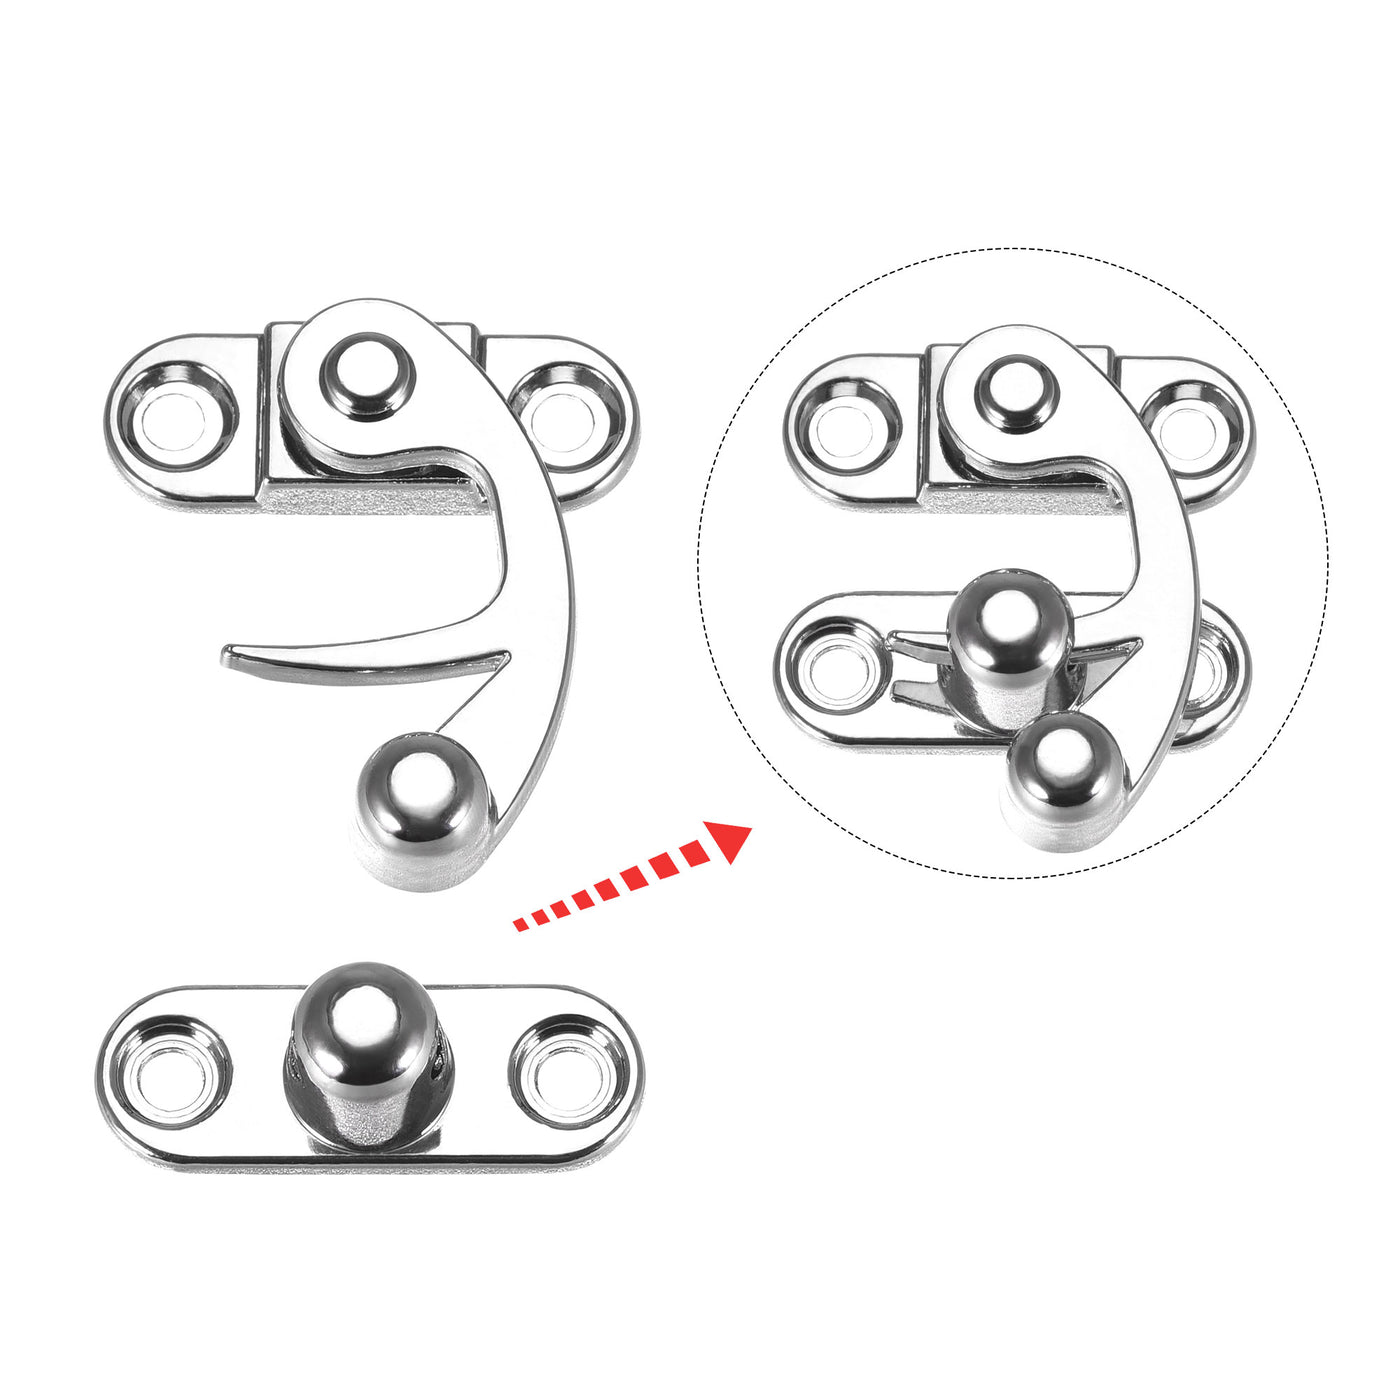 uxcell Uxcell Decorative Antique Right and Left Latch Hook Hasp Swing Arm Latch Silver Tone 1 Set